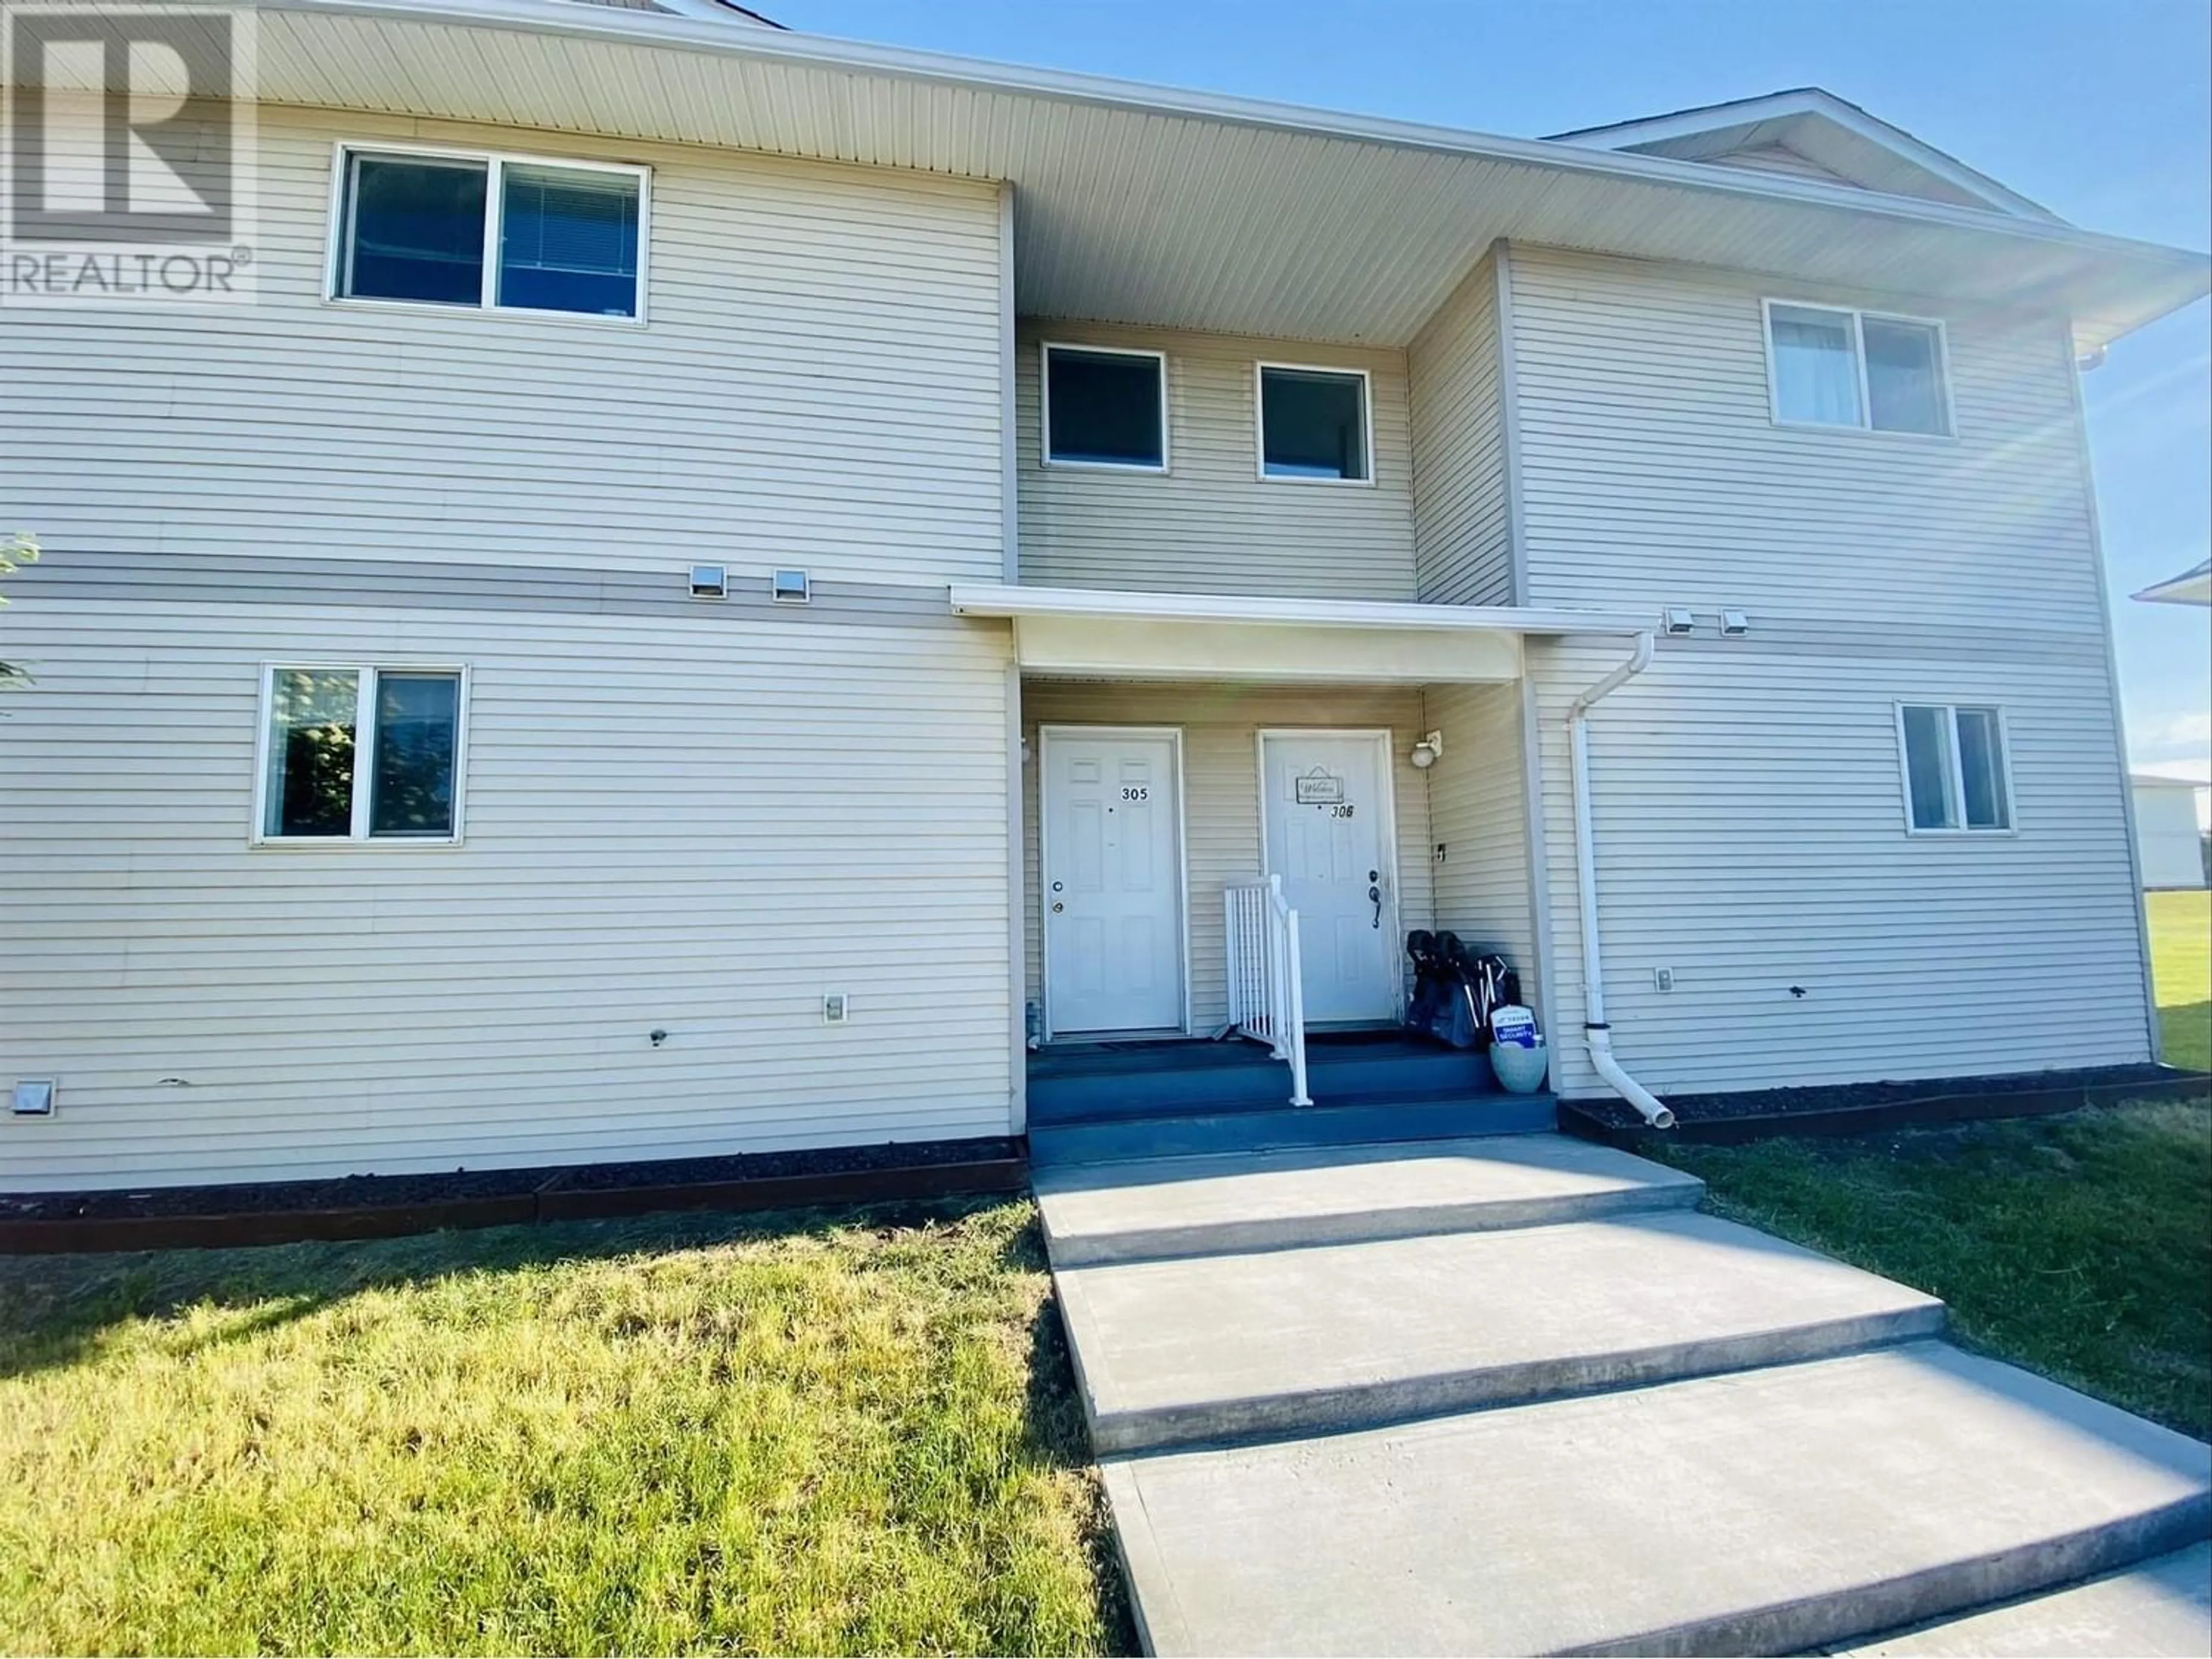 A pic from exterior of the house or condo for 305 9019 86 STREET, Fort St. John British Columbia V1J6X4